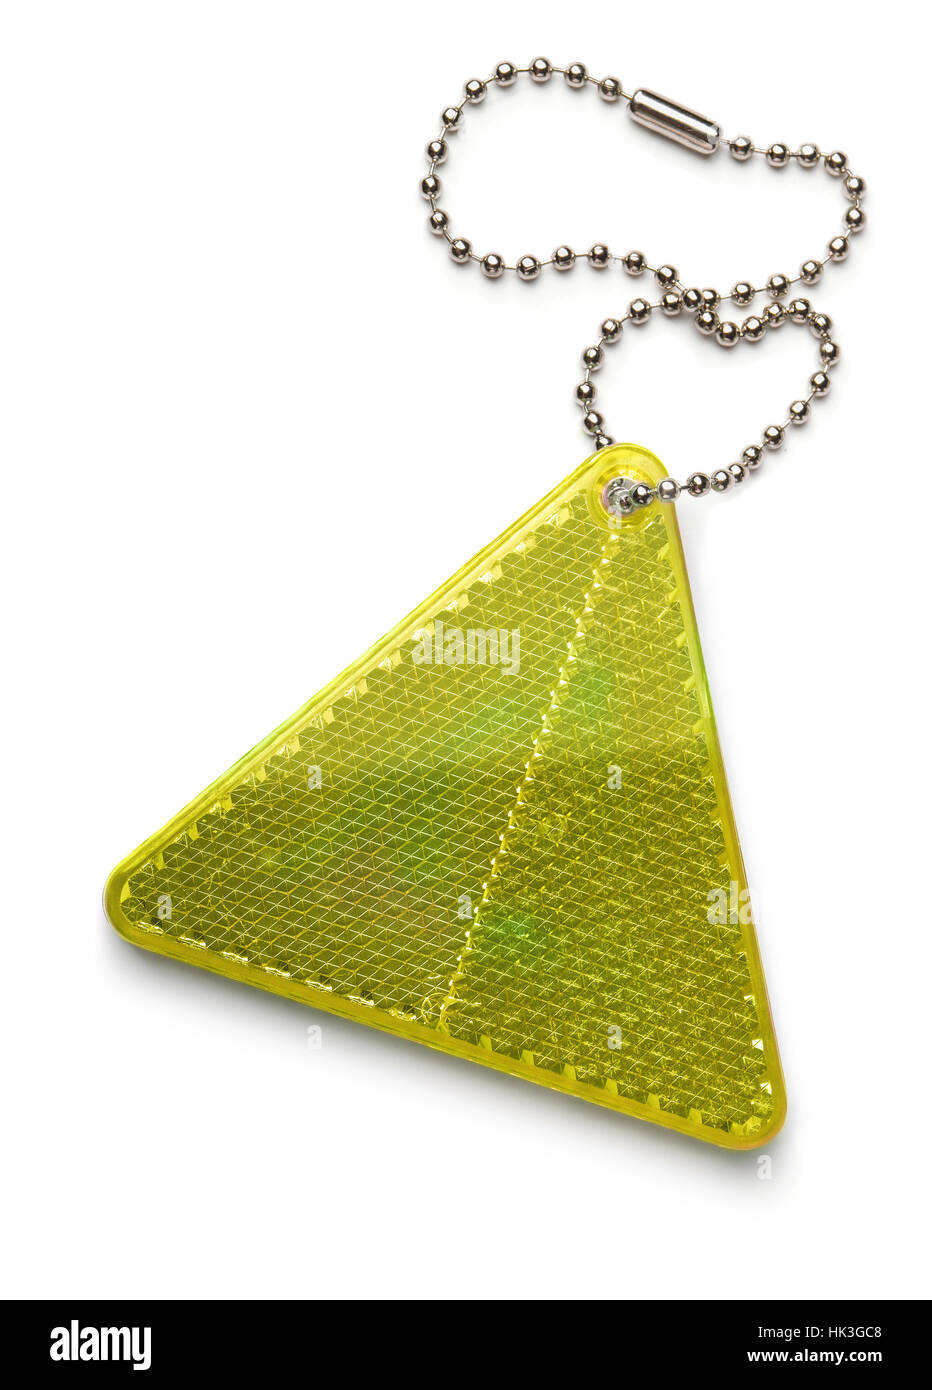 Yellow pedestrian safety reflector keyring isolated on white Stock Photo